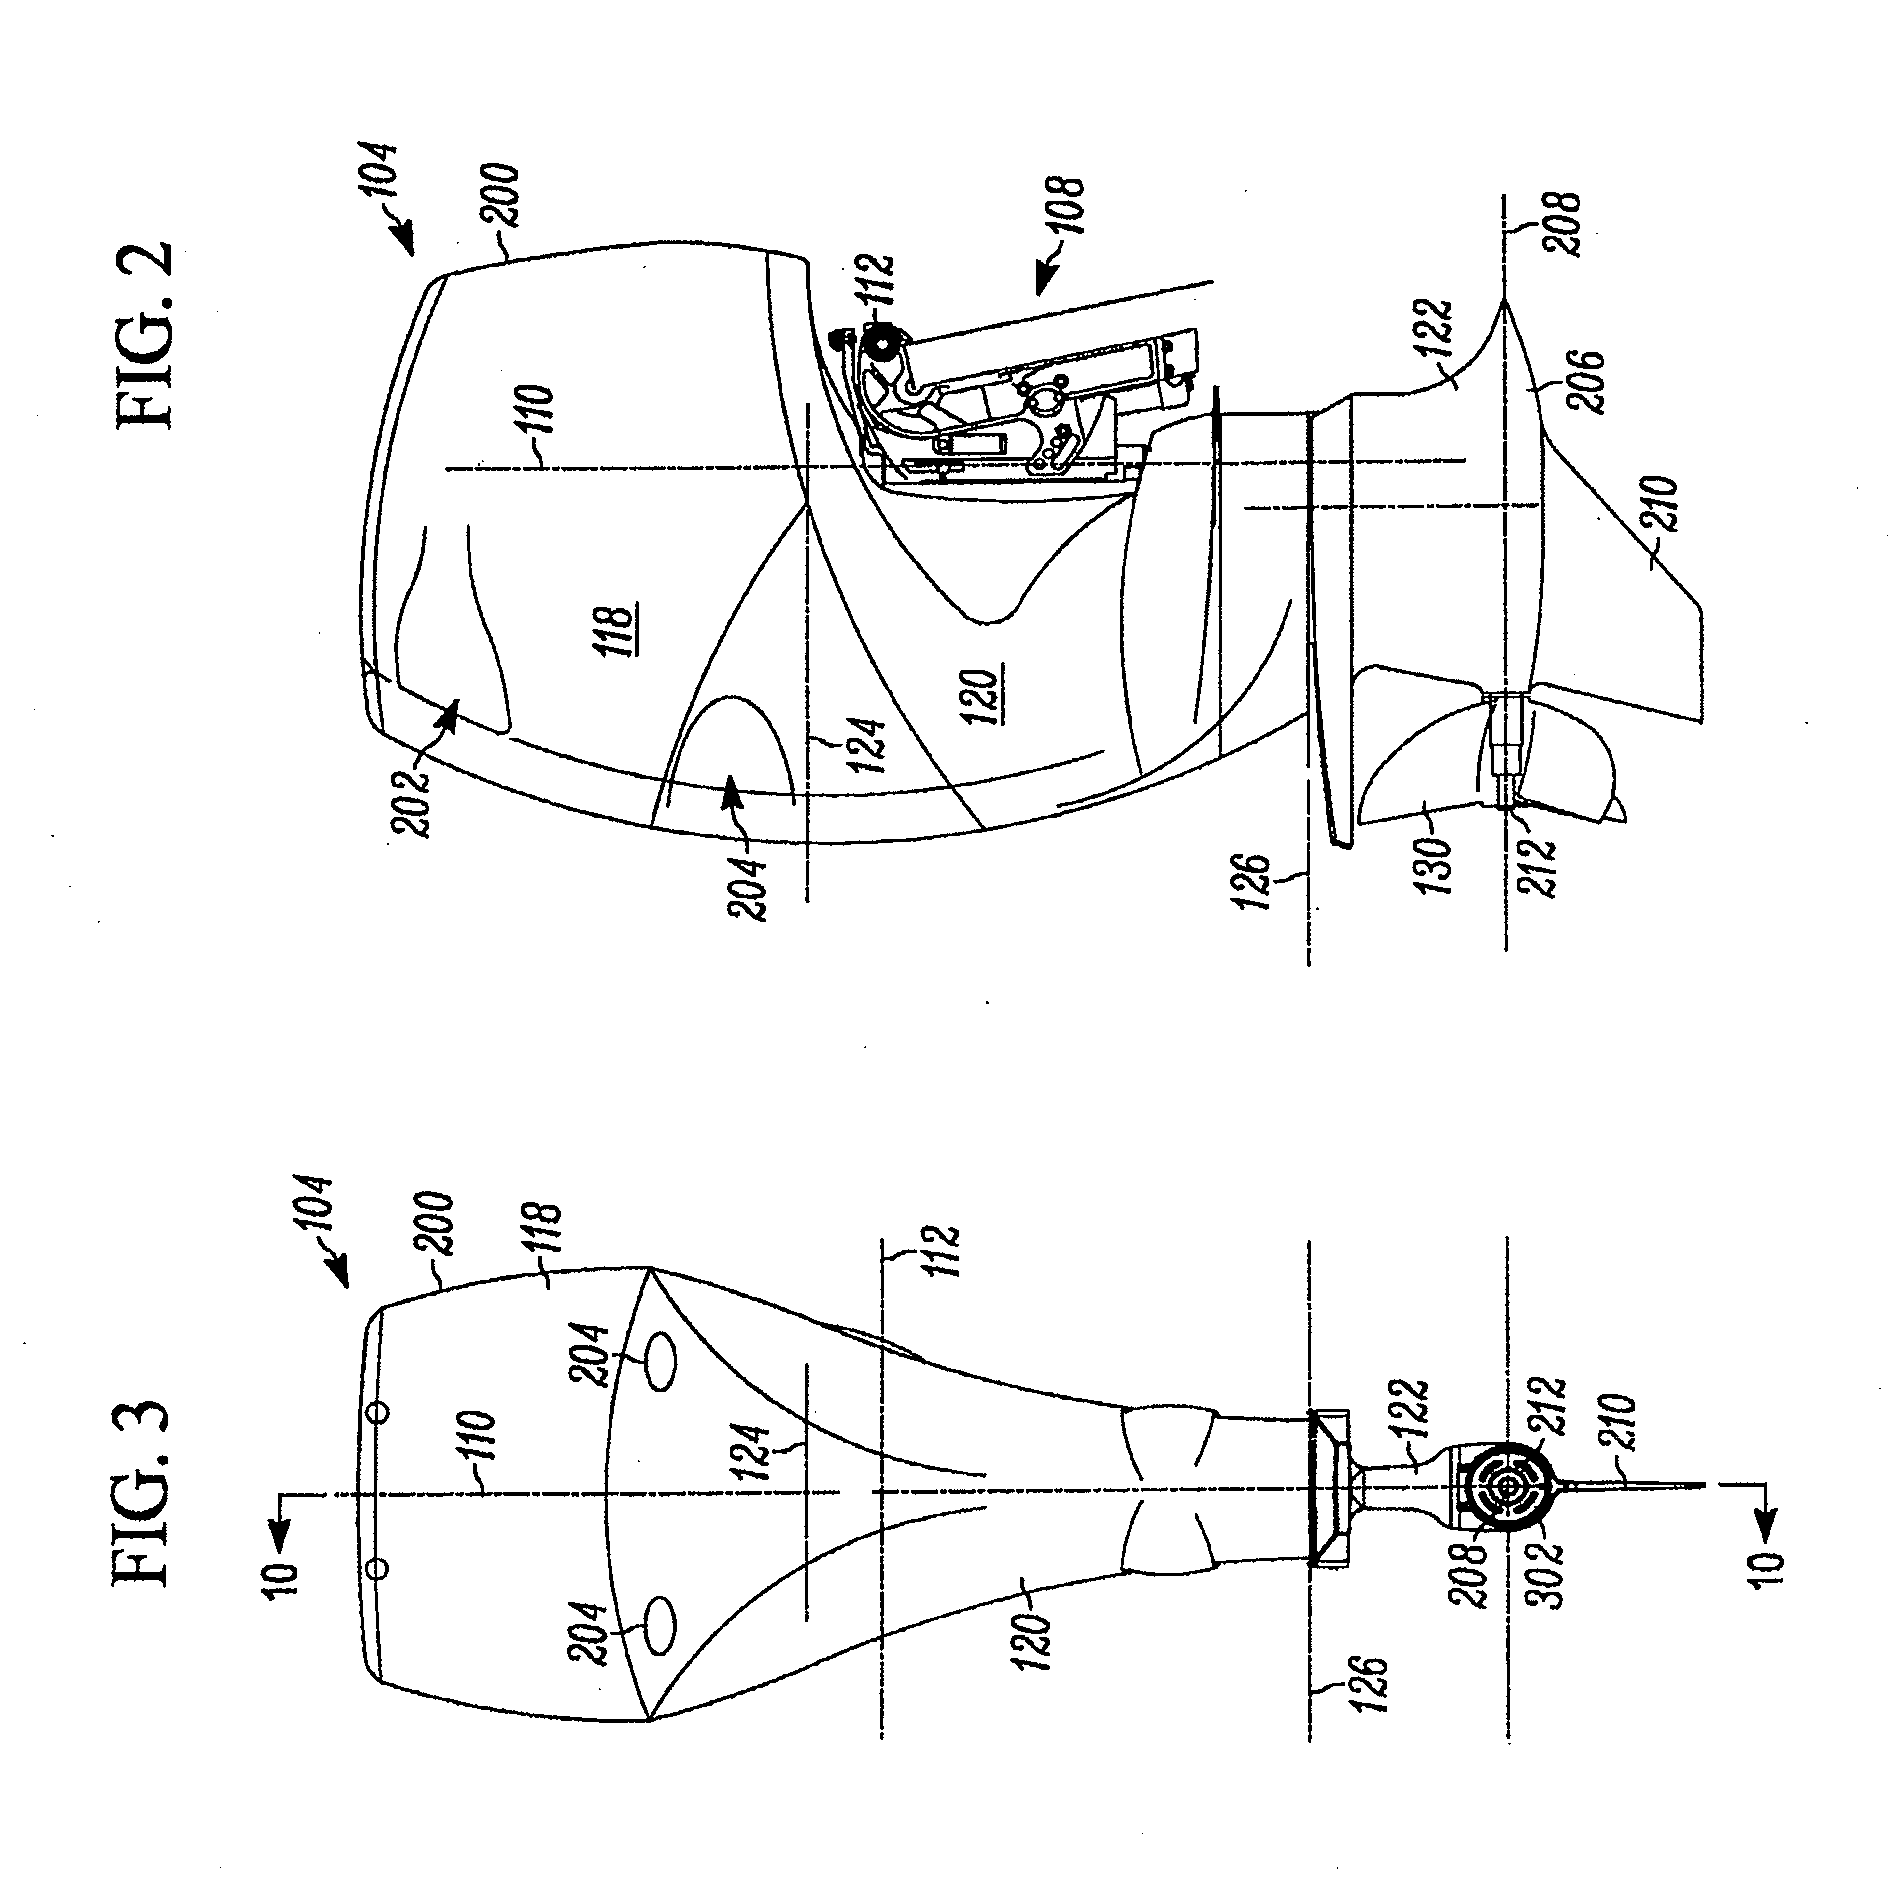 Large outboard motor including variable gear transfer case